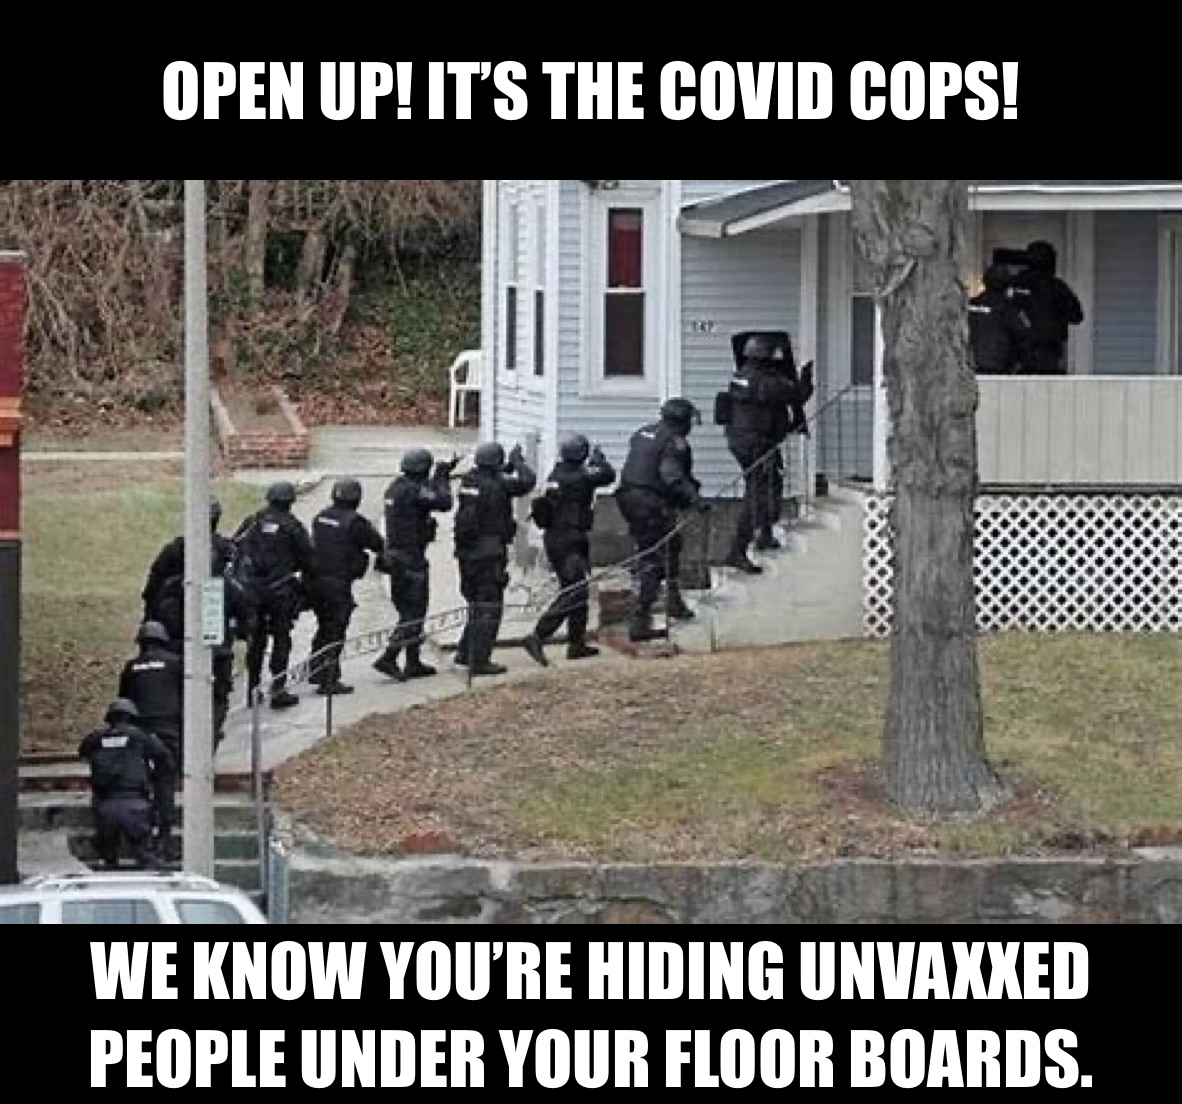 OPEN UP! IT’S THE COVID COPS! WE KNOW YOU’RE HIDING UNVAXXED PEOPLE UNDER YOUR FLOOR BOARDS.